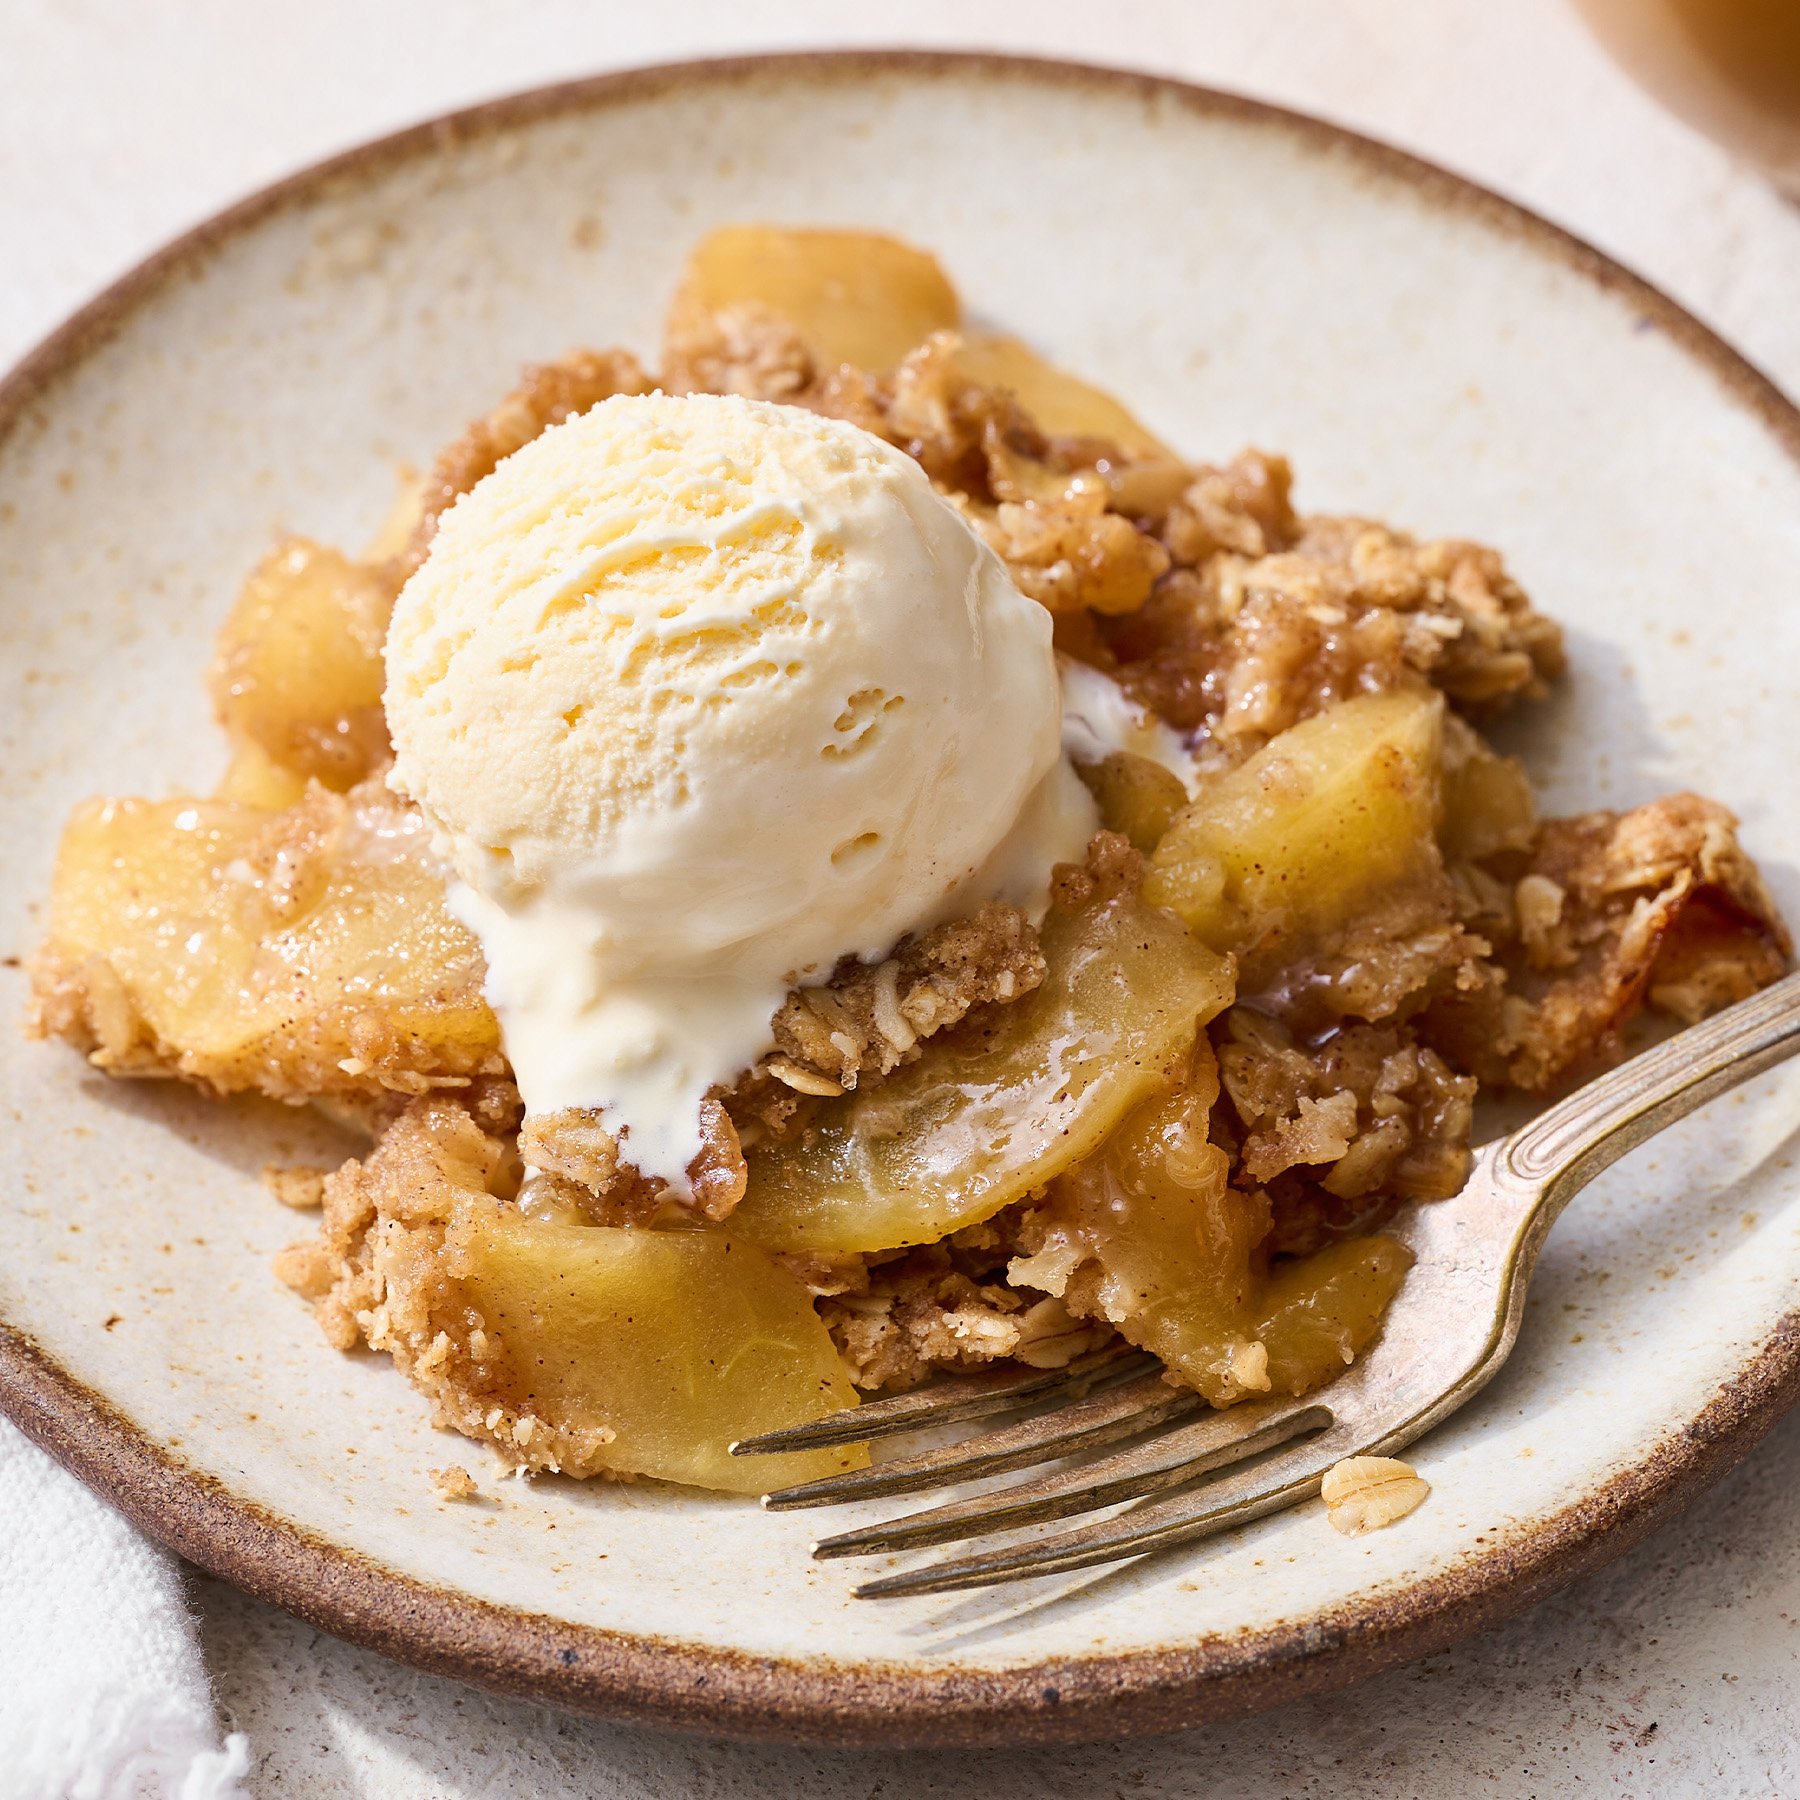 homemade apple crisp with streusel topping on a plate with a scoop of vanilla ice cream on top